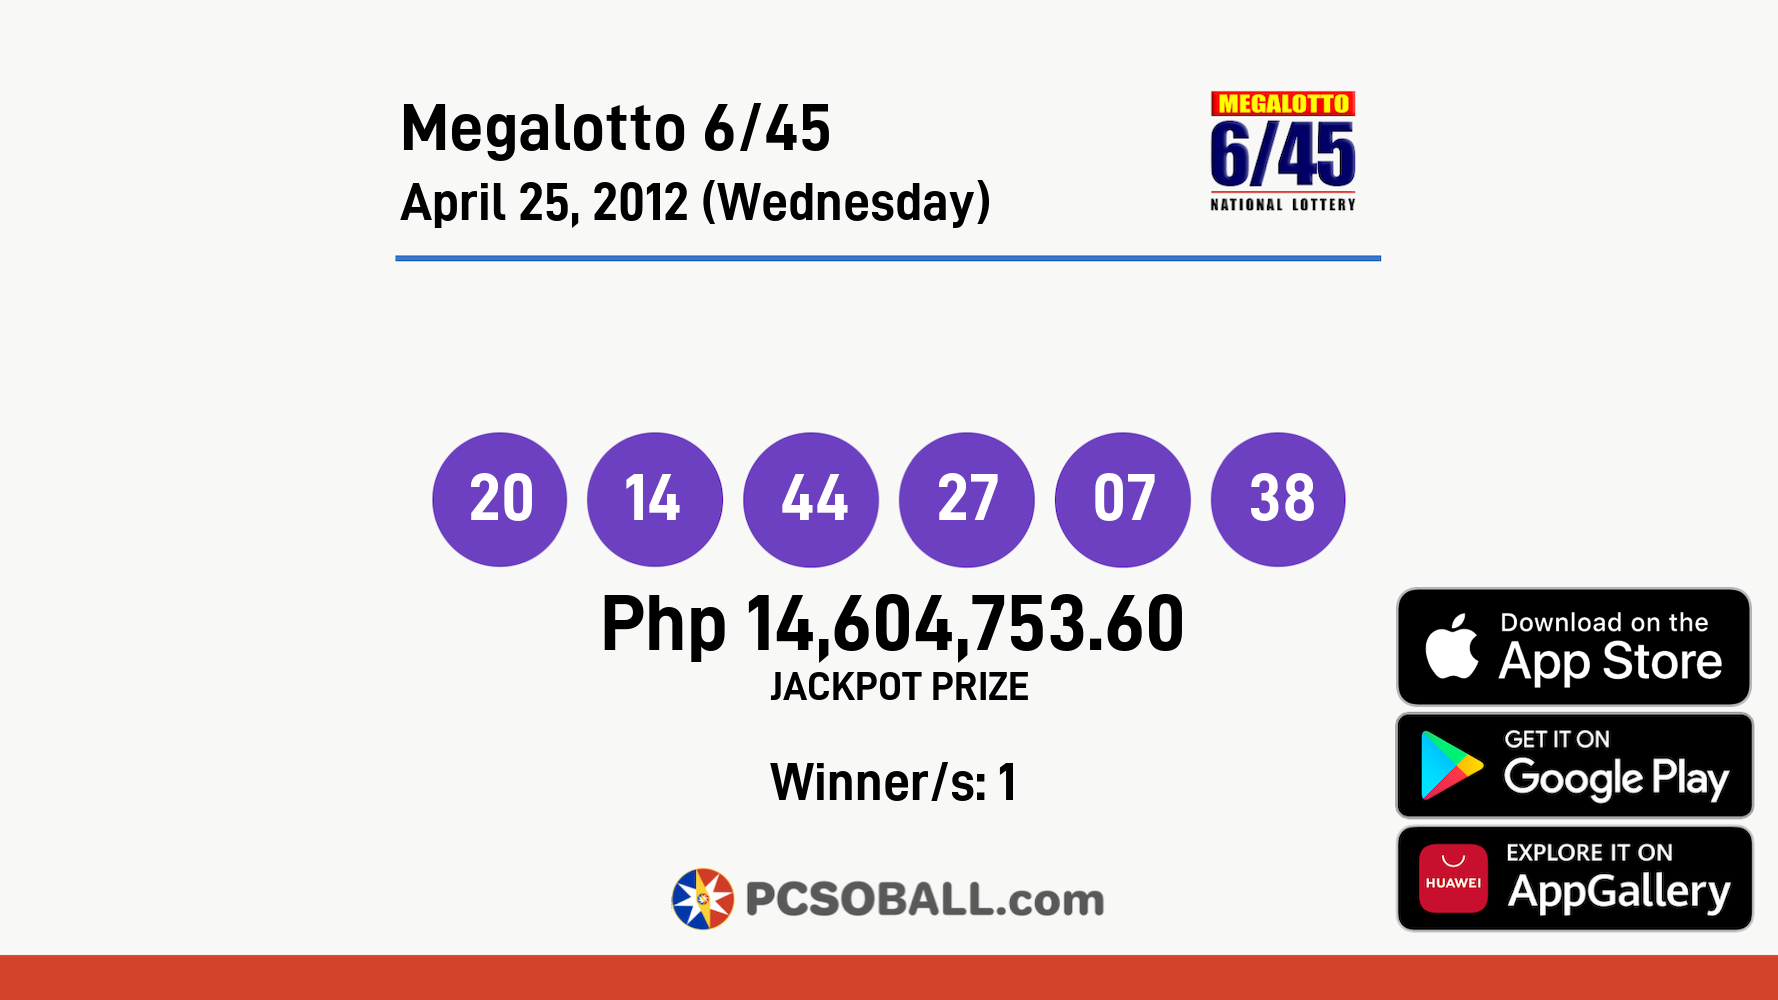 Megalotto 6/45 April 25, 2012 (Wednesday) Result